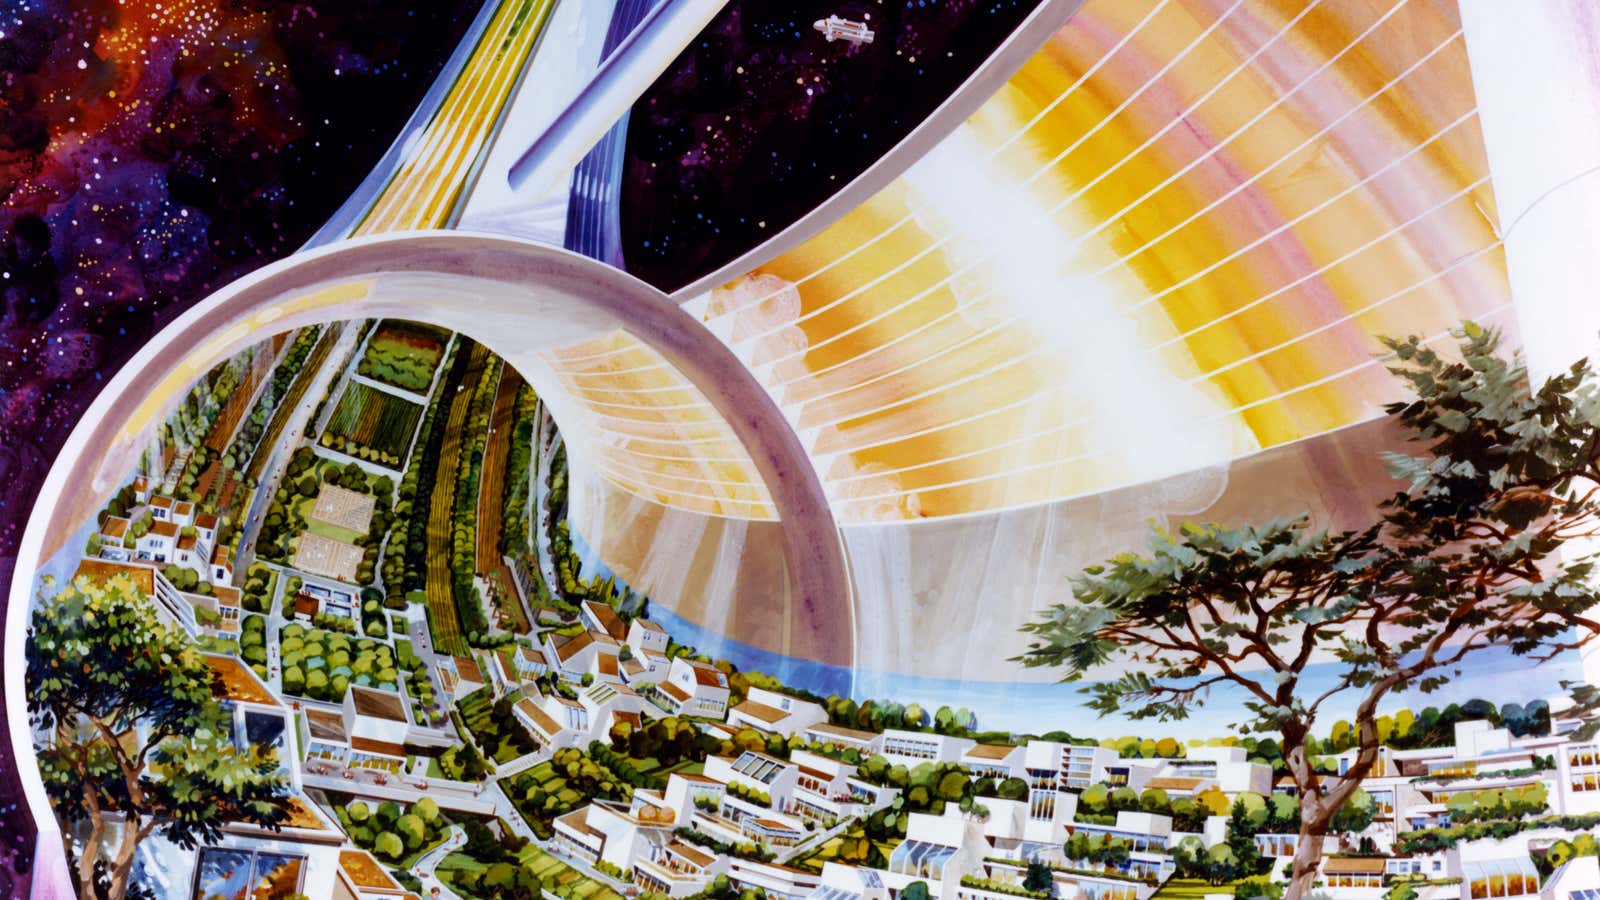 A view of our space-bound future from the 1970s.